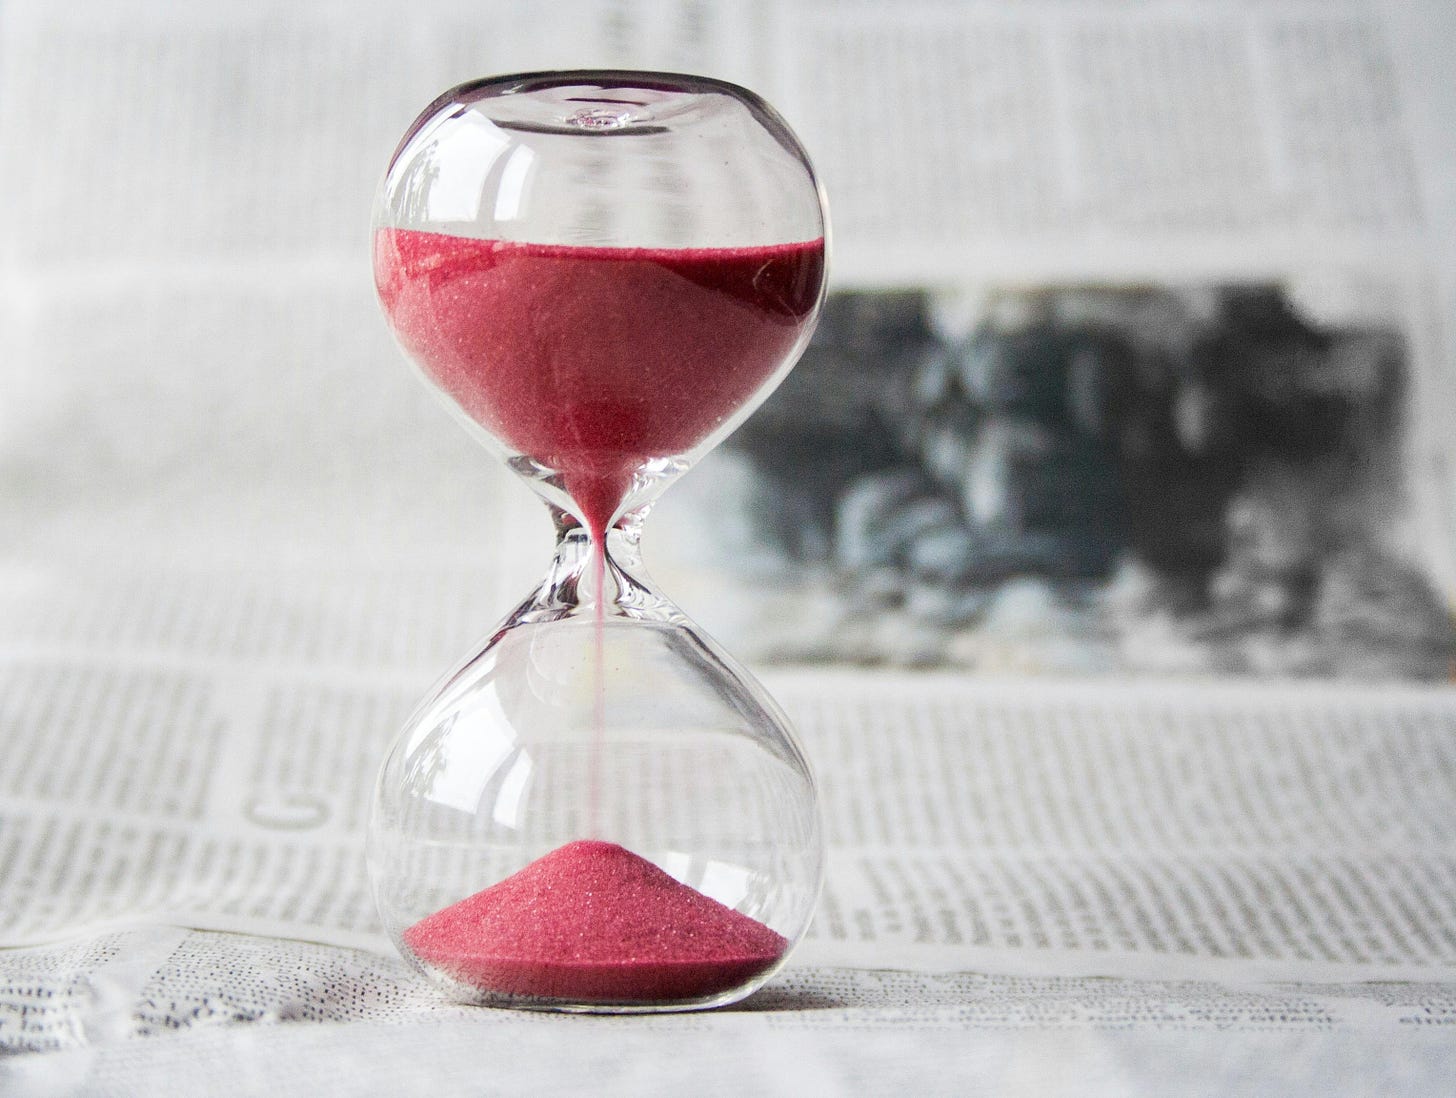 Clear hourglass with red sand. Photo by Pixabay: https://www.pexels.com/photo/clear-glass-with-red-sand-grainer-39396/